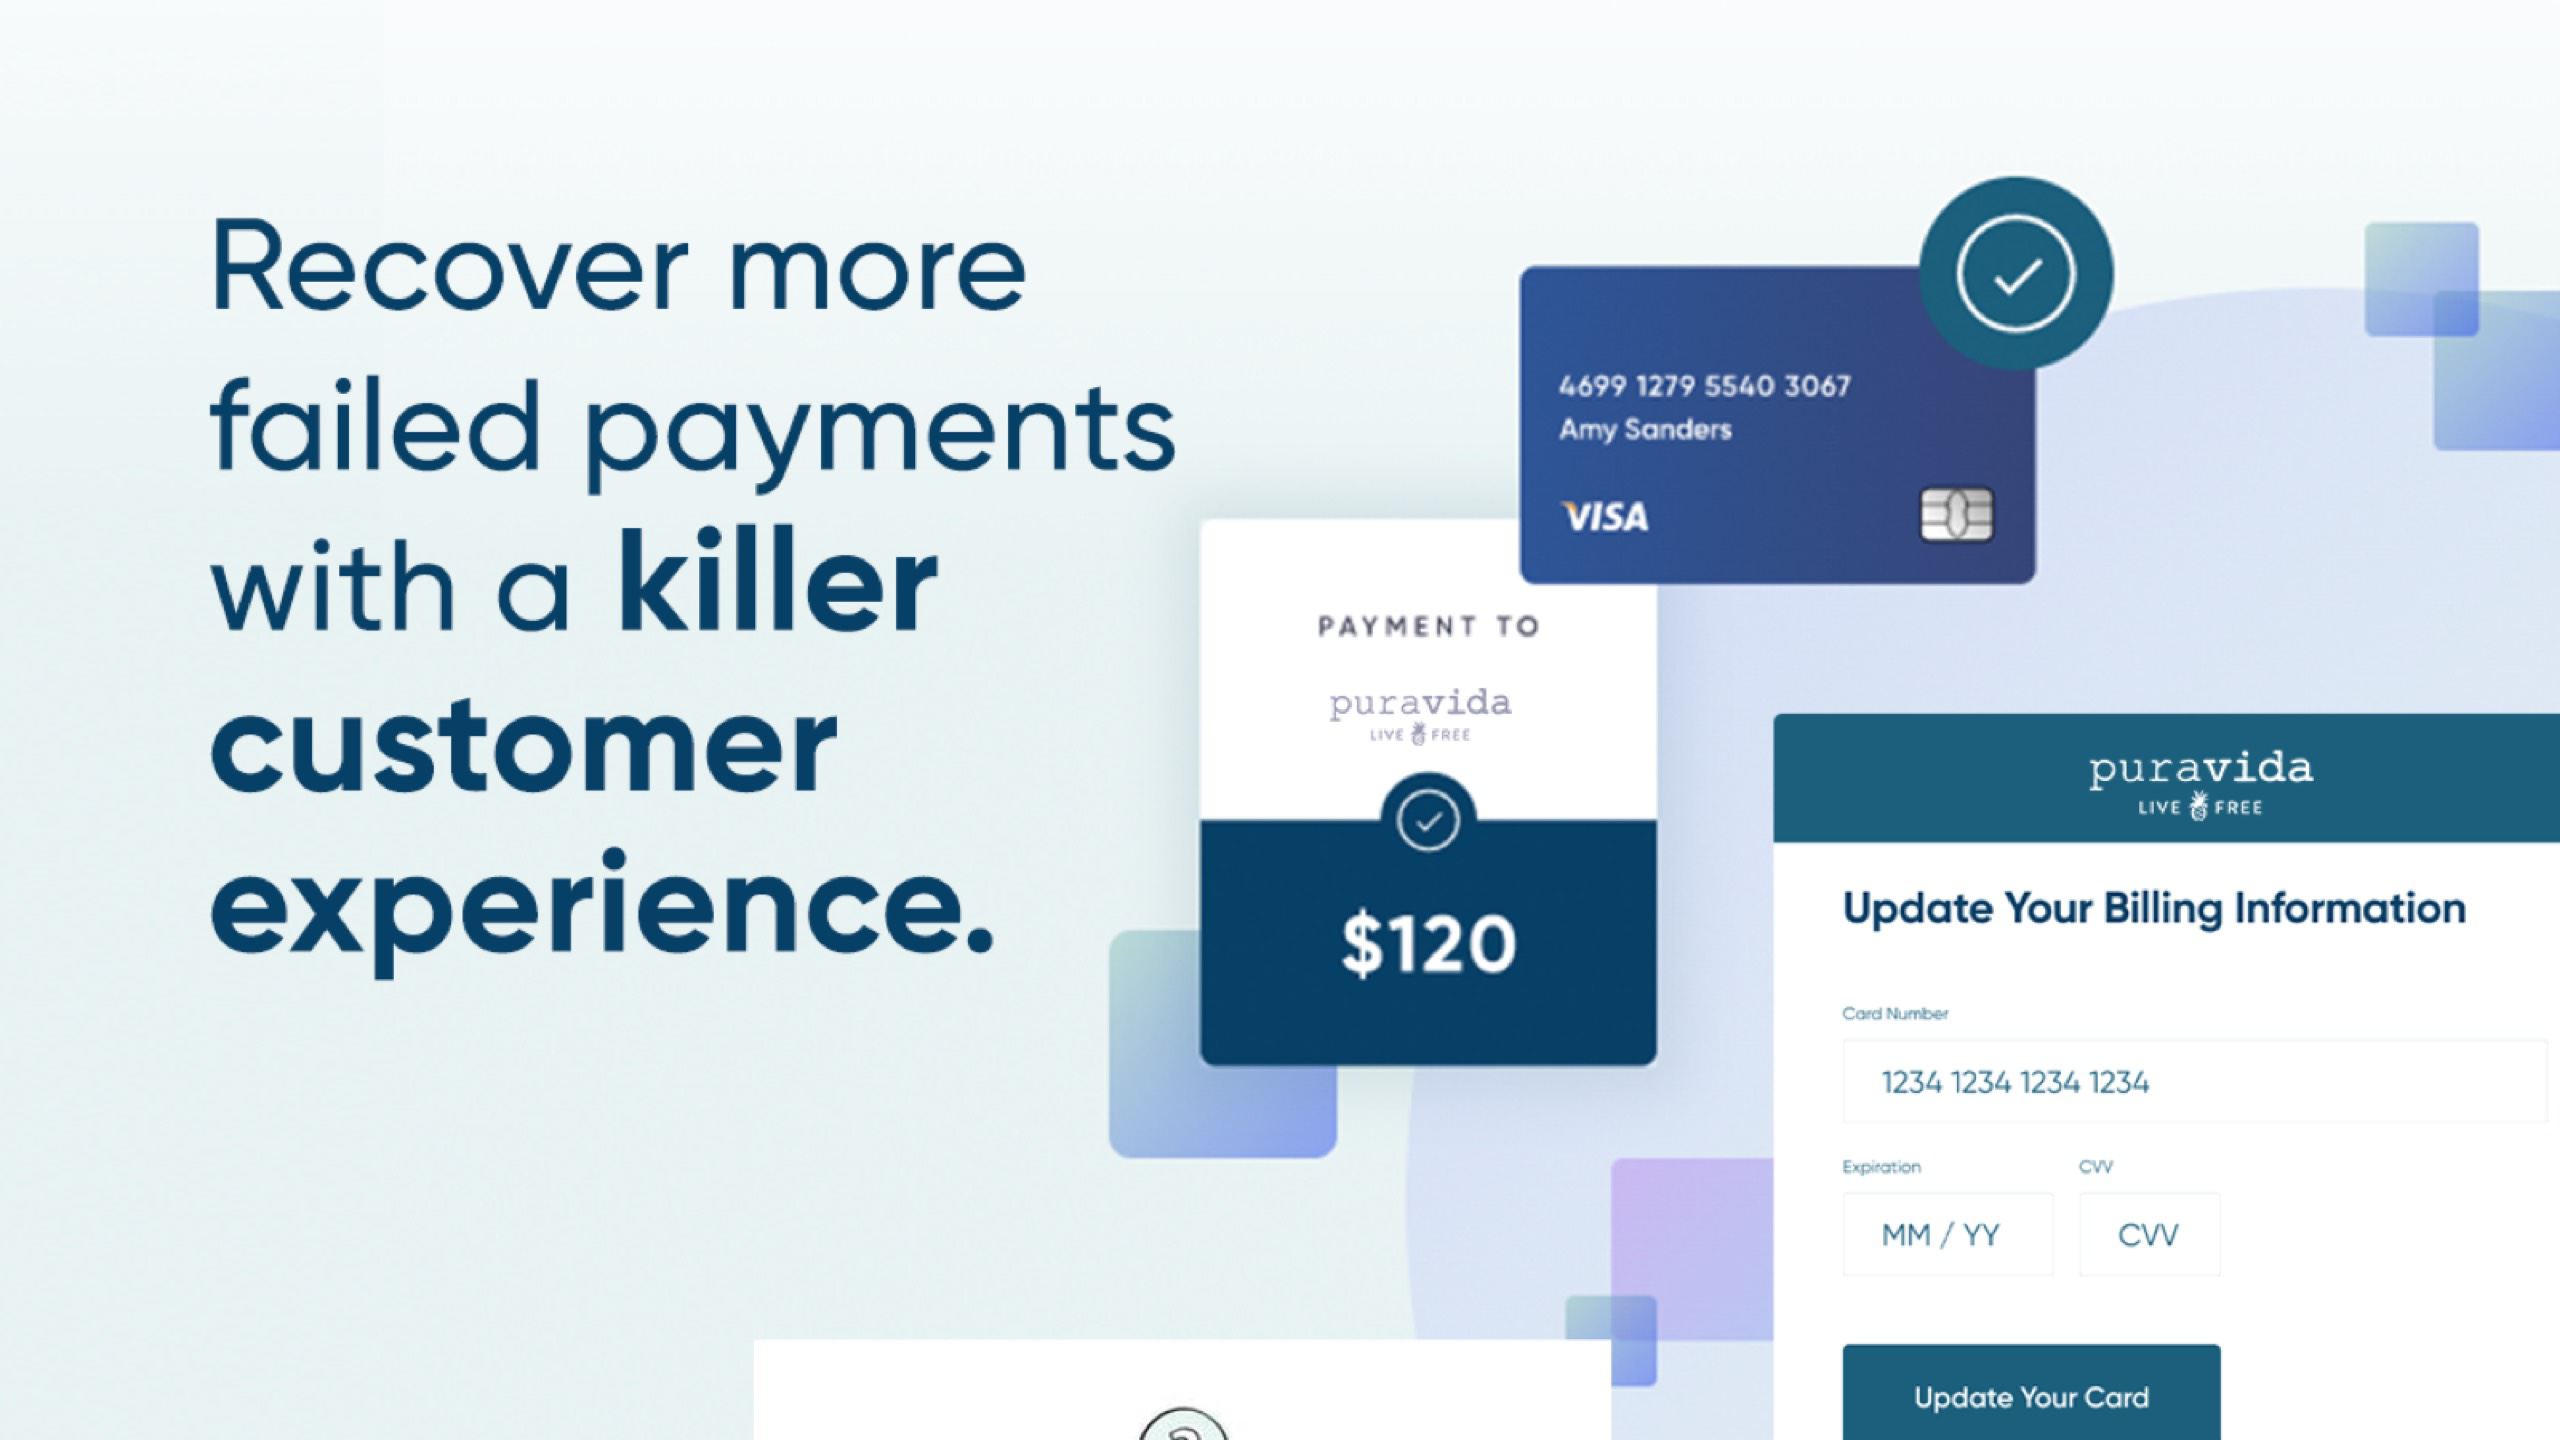 Recover more failed payments with a killer customer experience